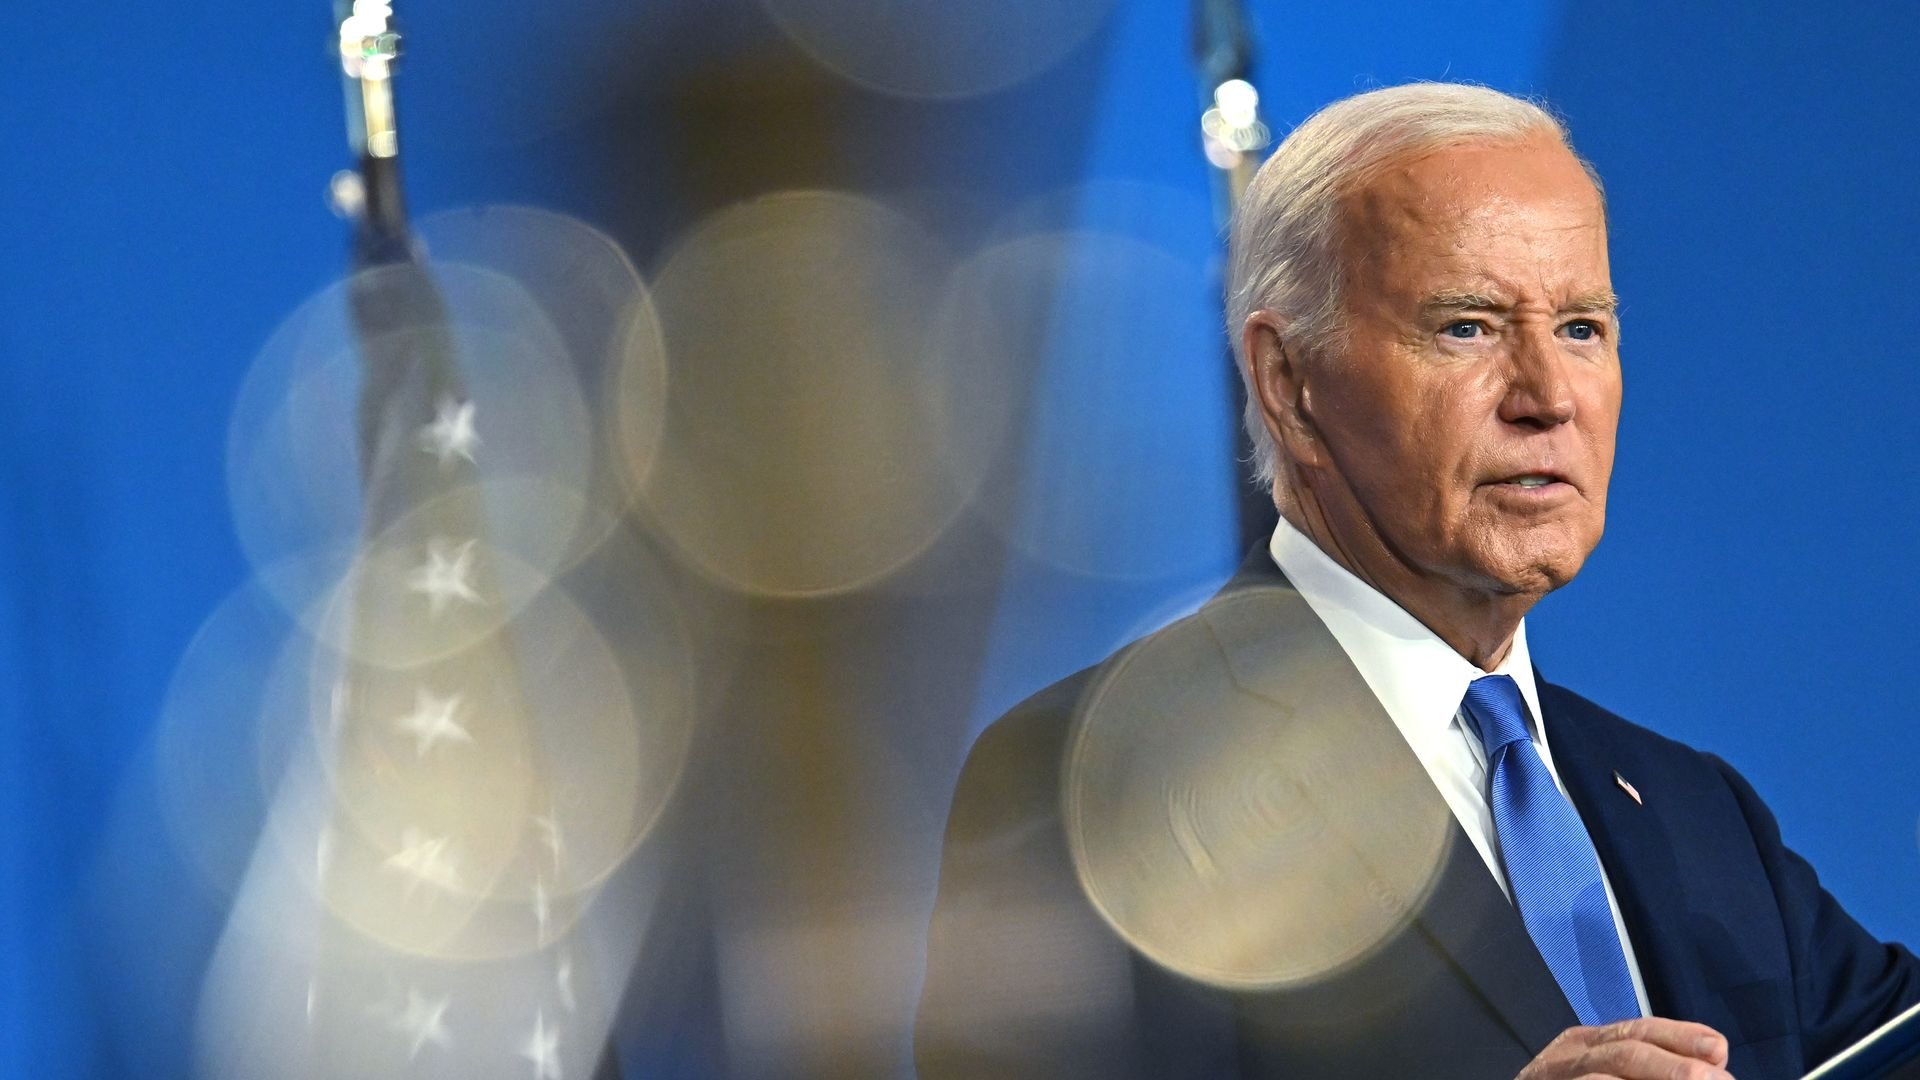 Biden buys time: 5 takeaways from the NATO press conference